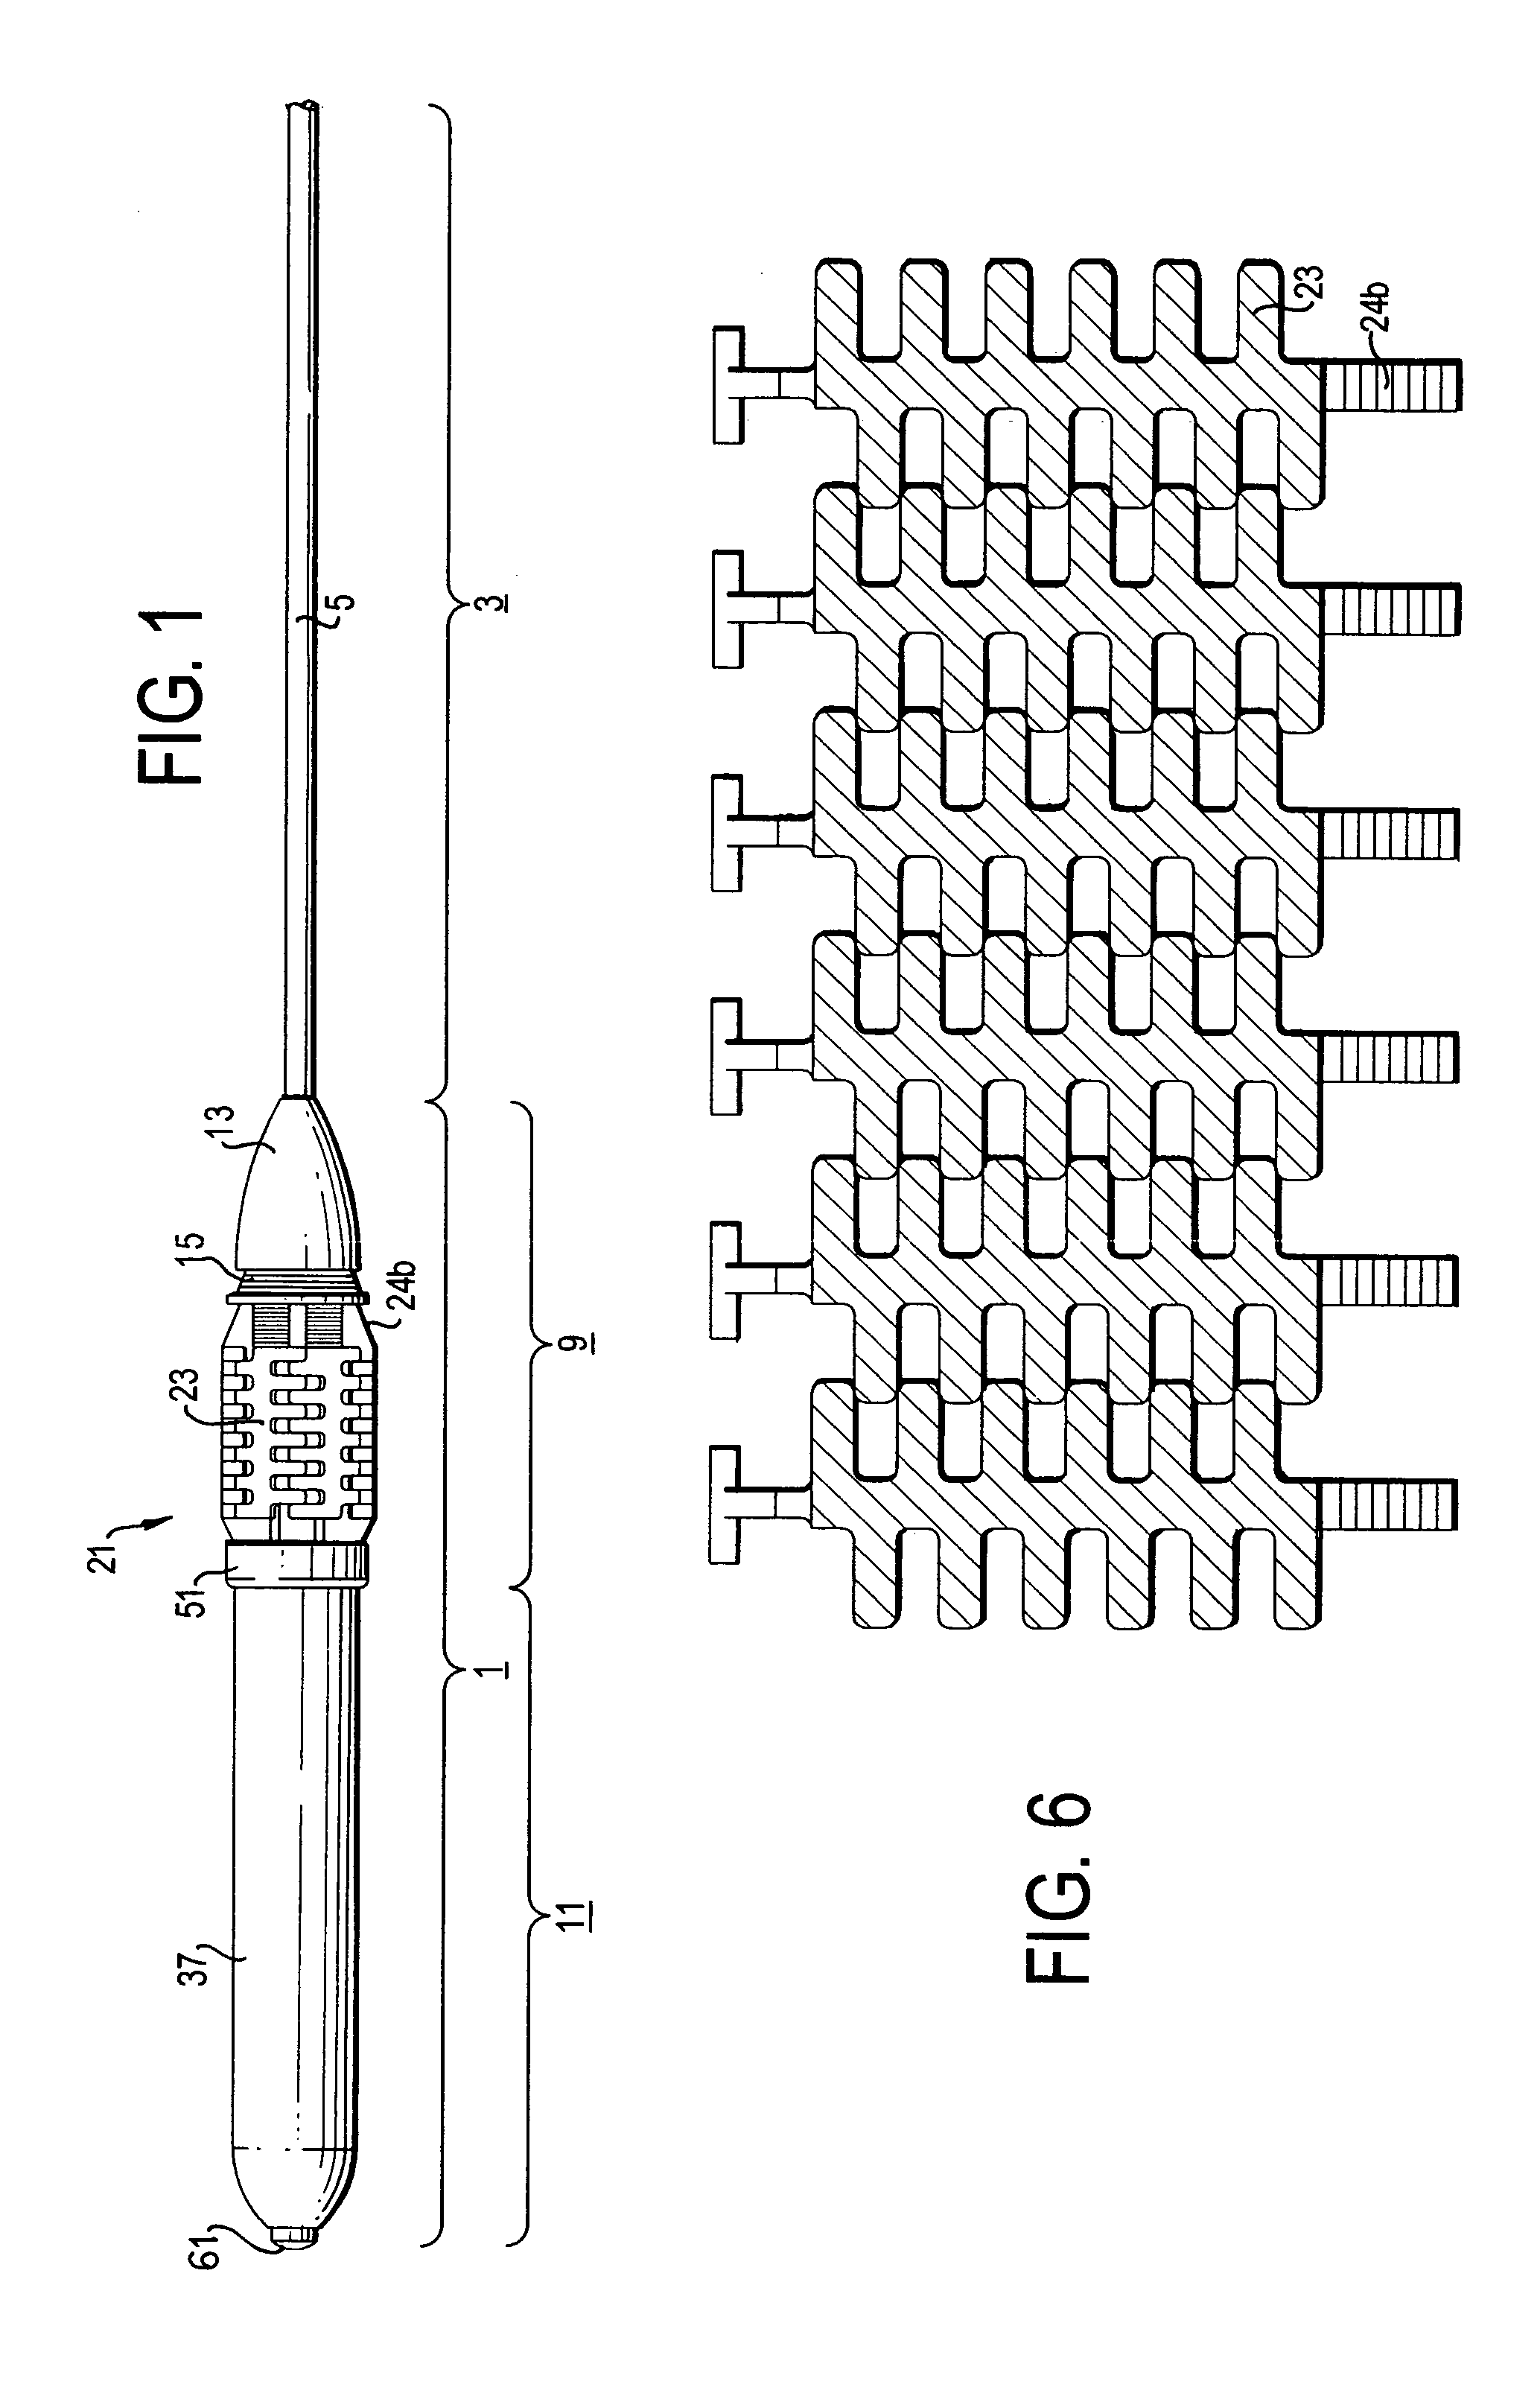 Actuating and locking mechanism for a surgical tool